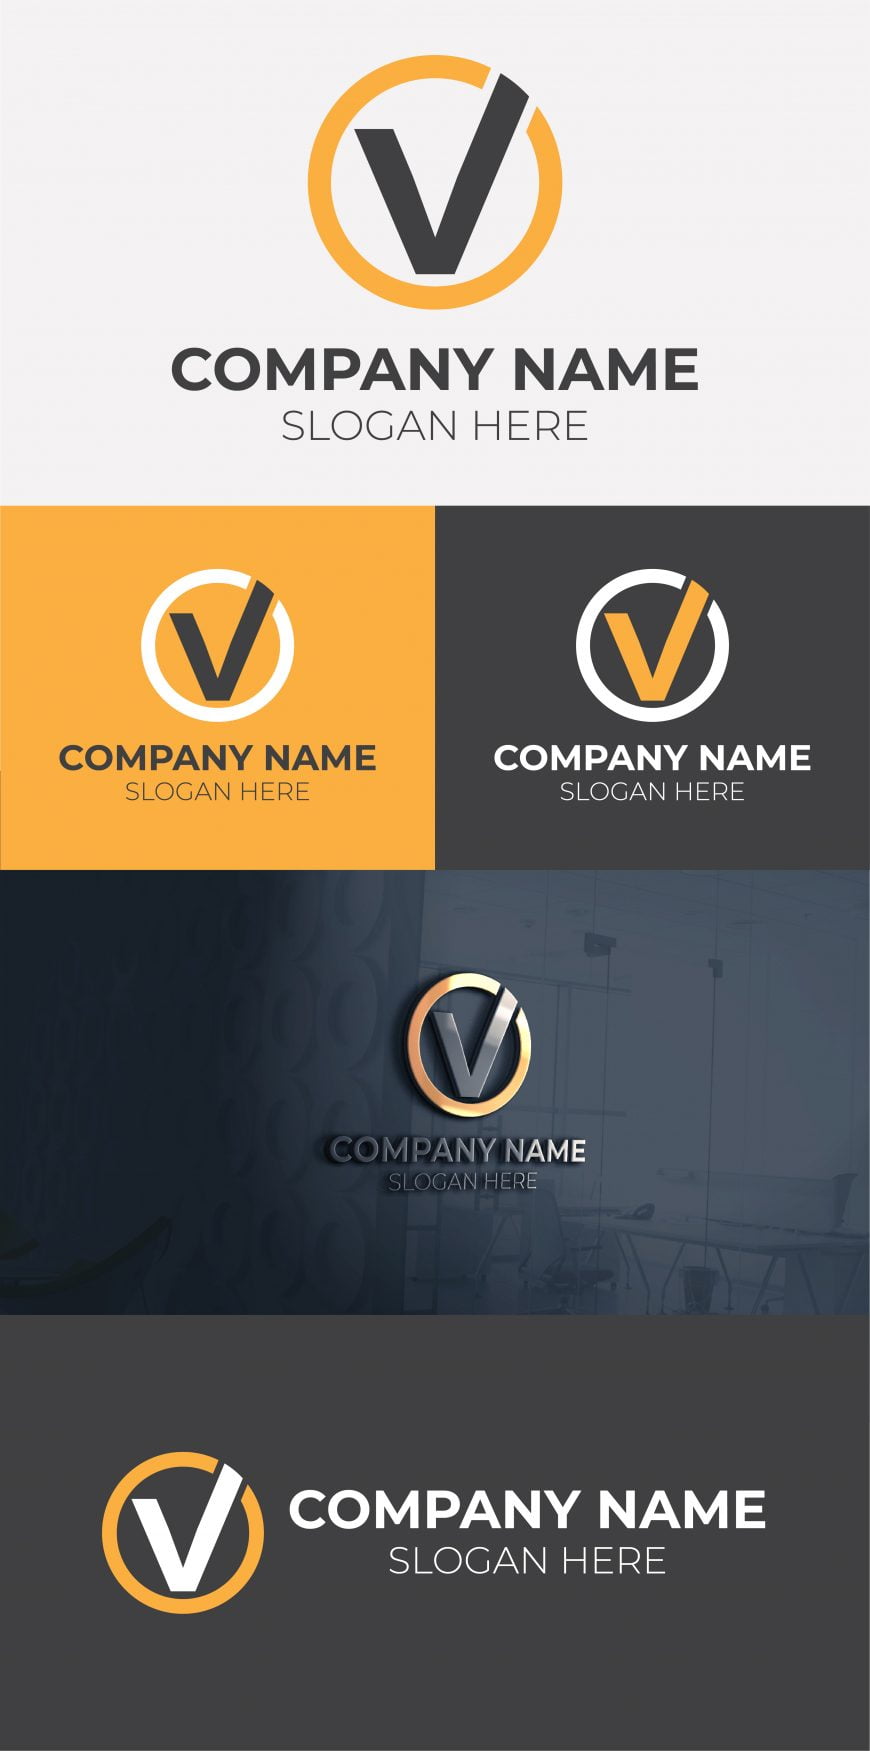 INITIAL-V-LOGO-FREE-VECTOR-TEMPLATE-1-scaled